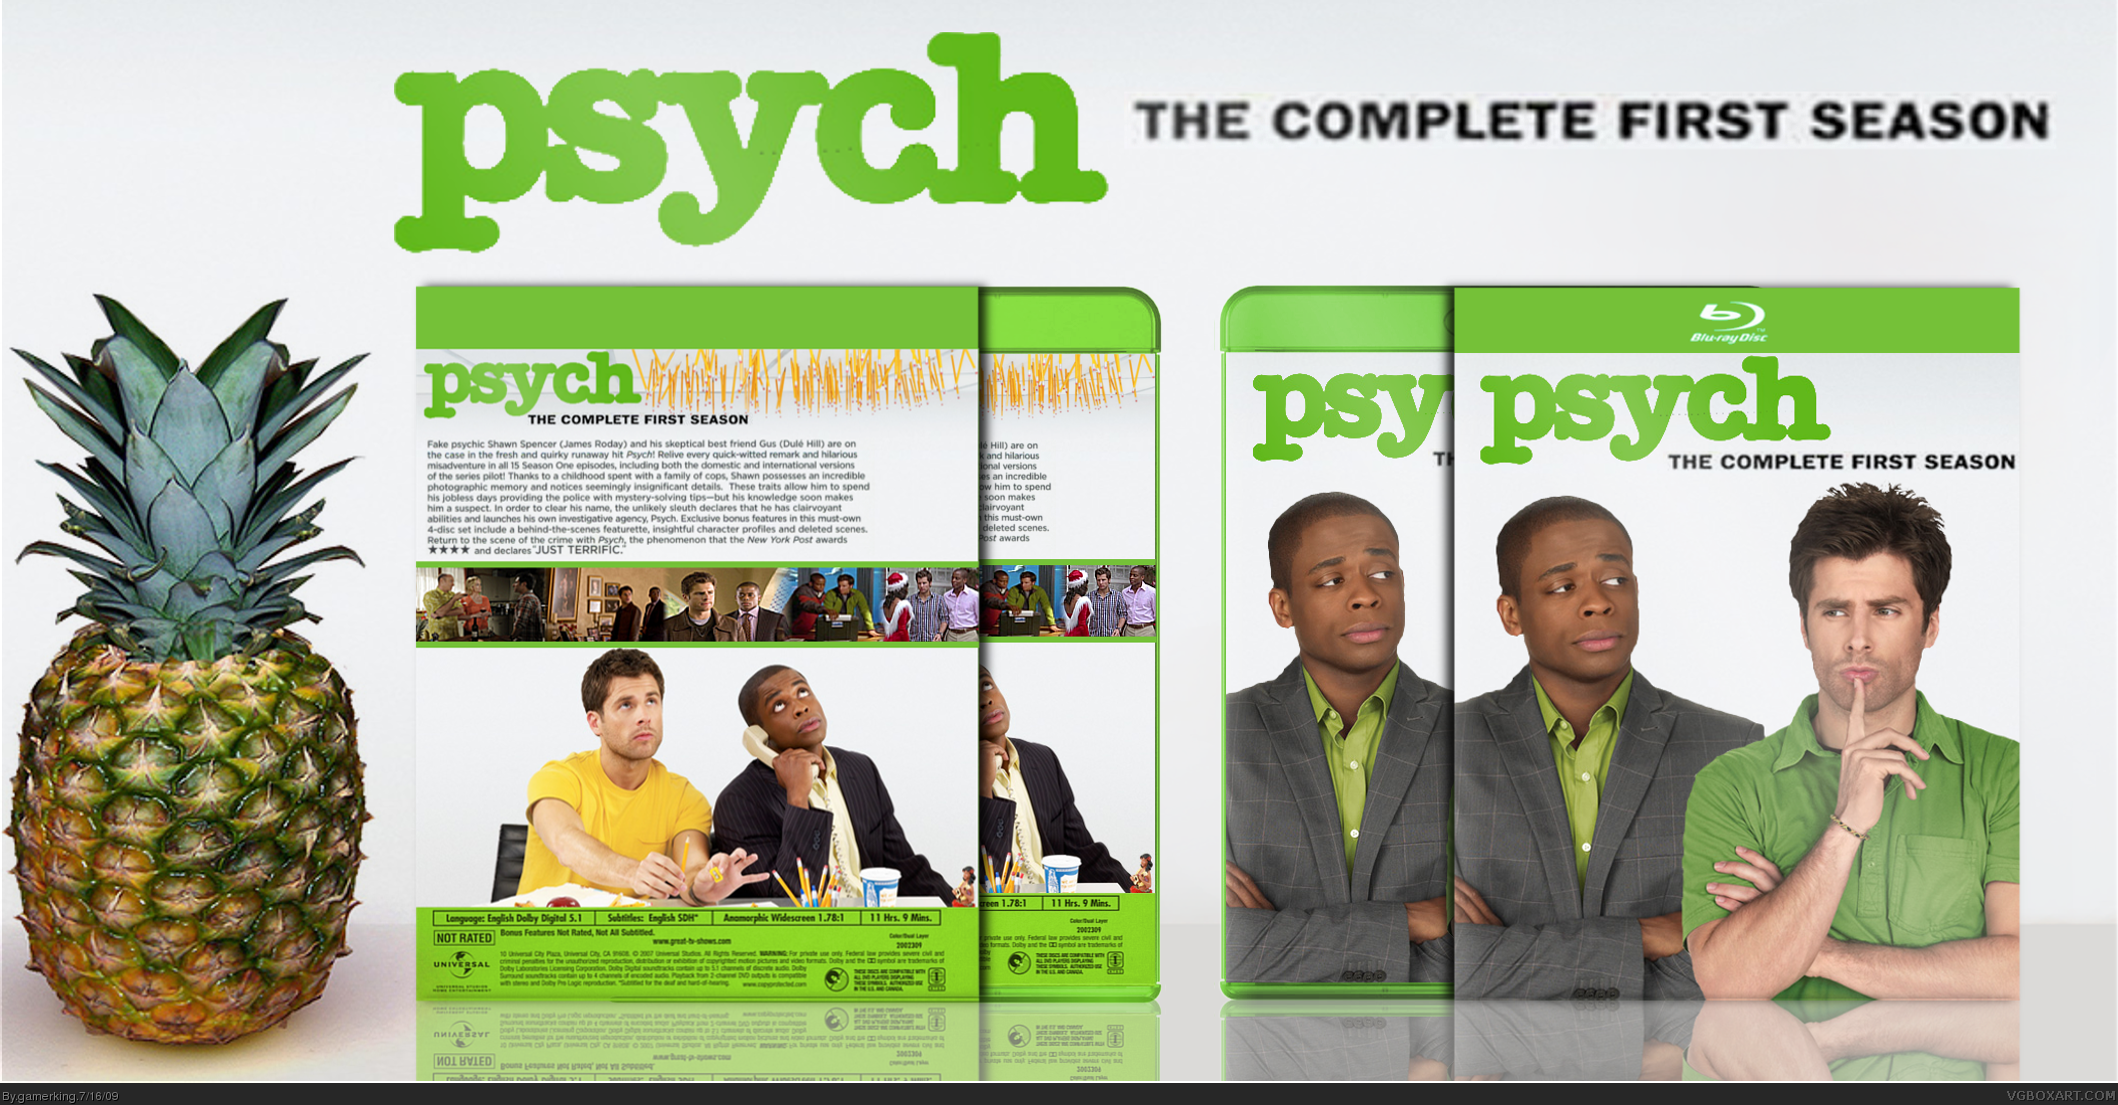 Psych: The Complete First Season box cover